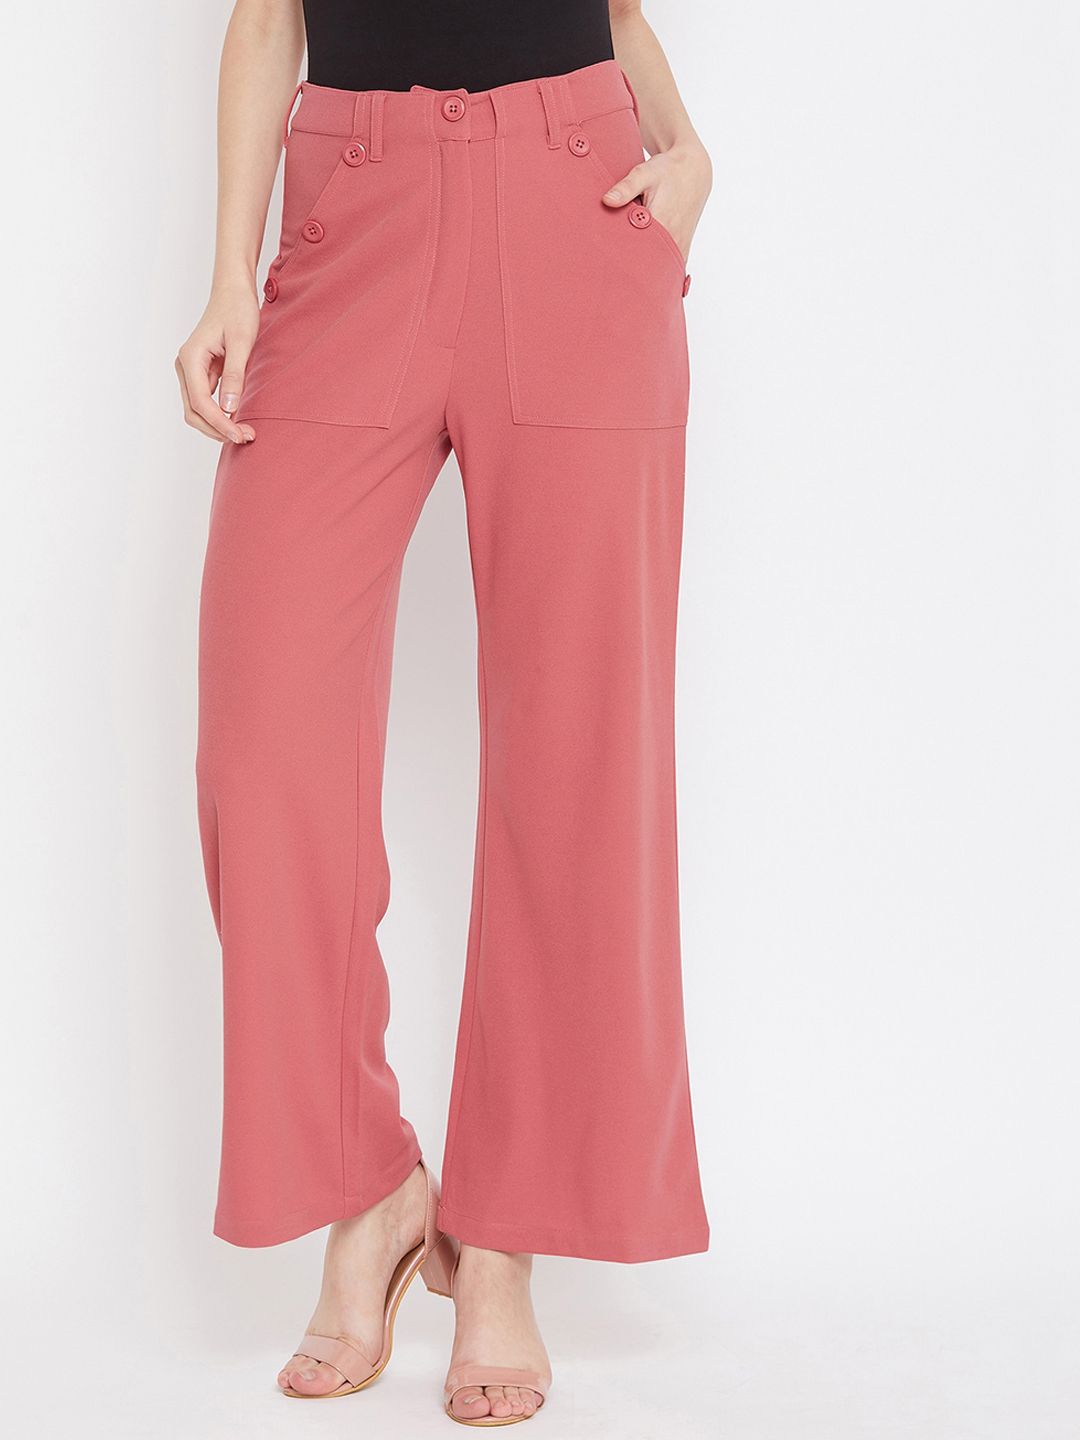 Zastraa Women Pink Regular Fit Solid Parallel Trousers Price in India